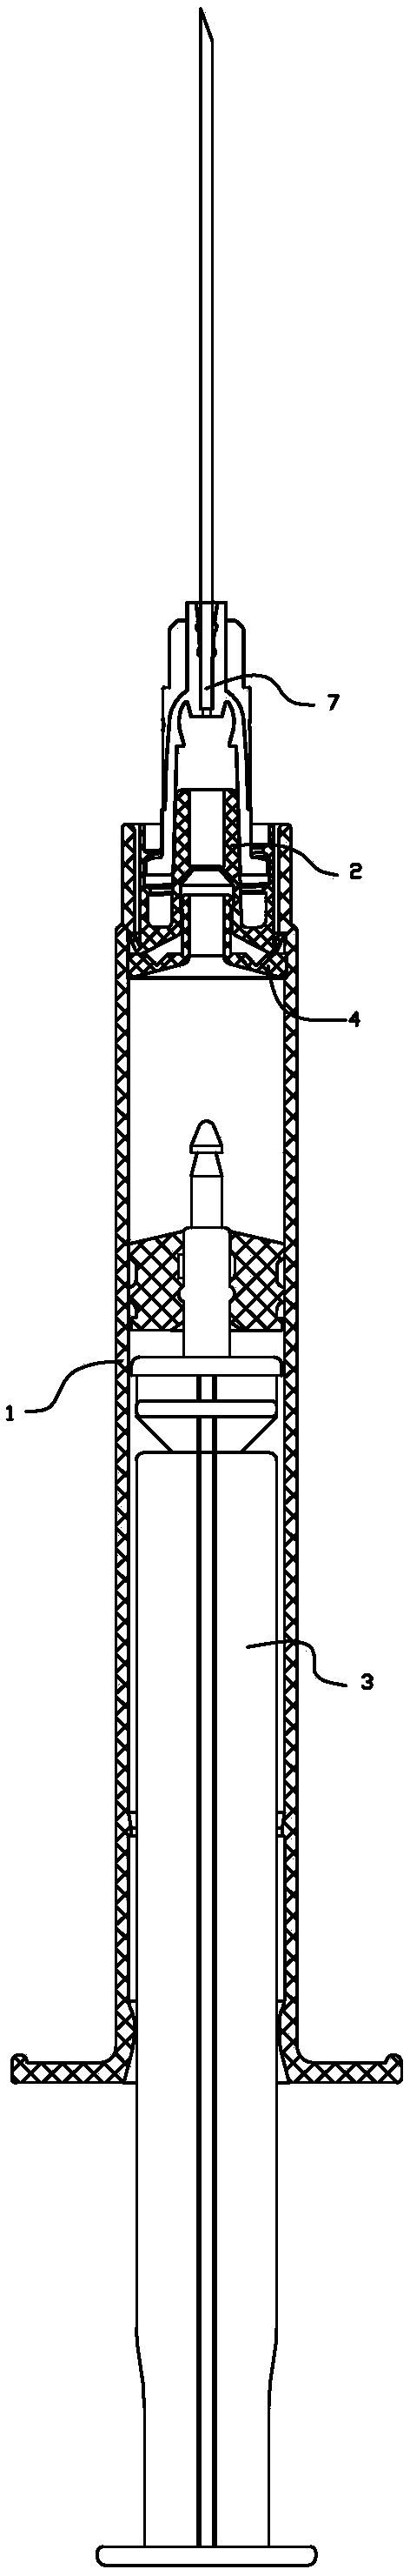 Disposable safe self-destroying injector with self-locked needle seat